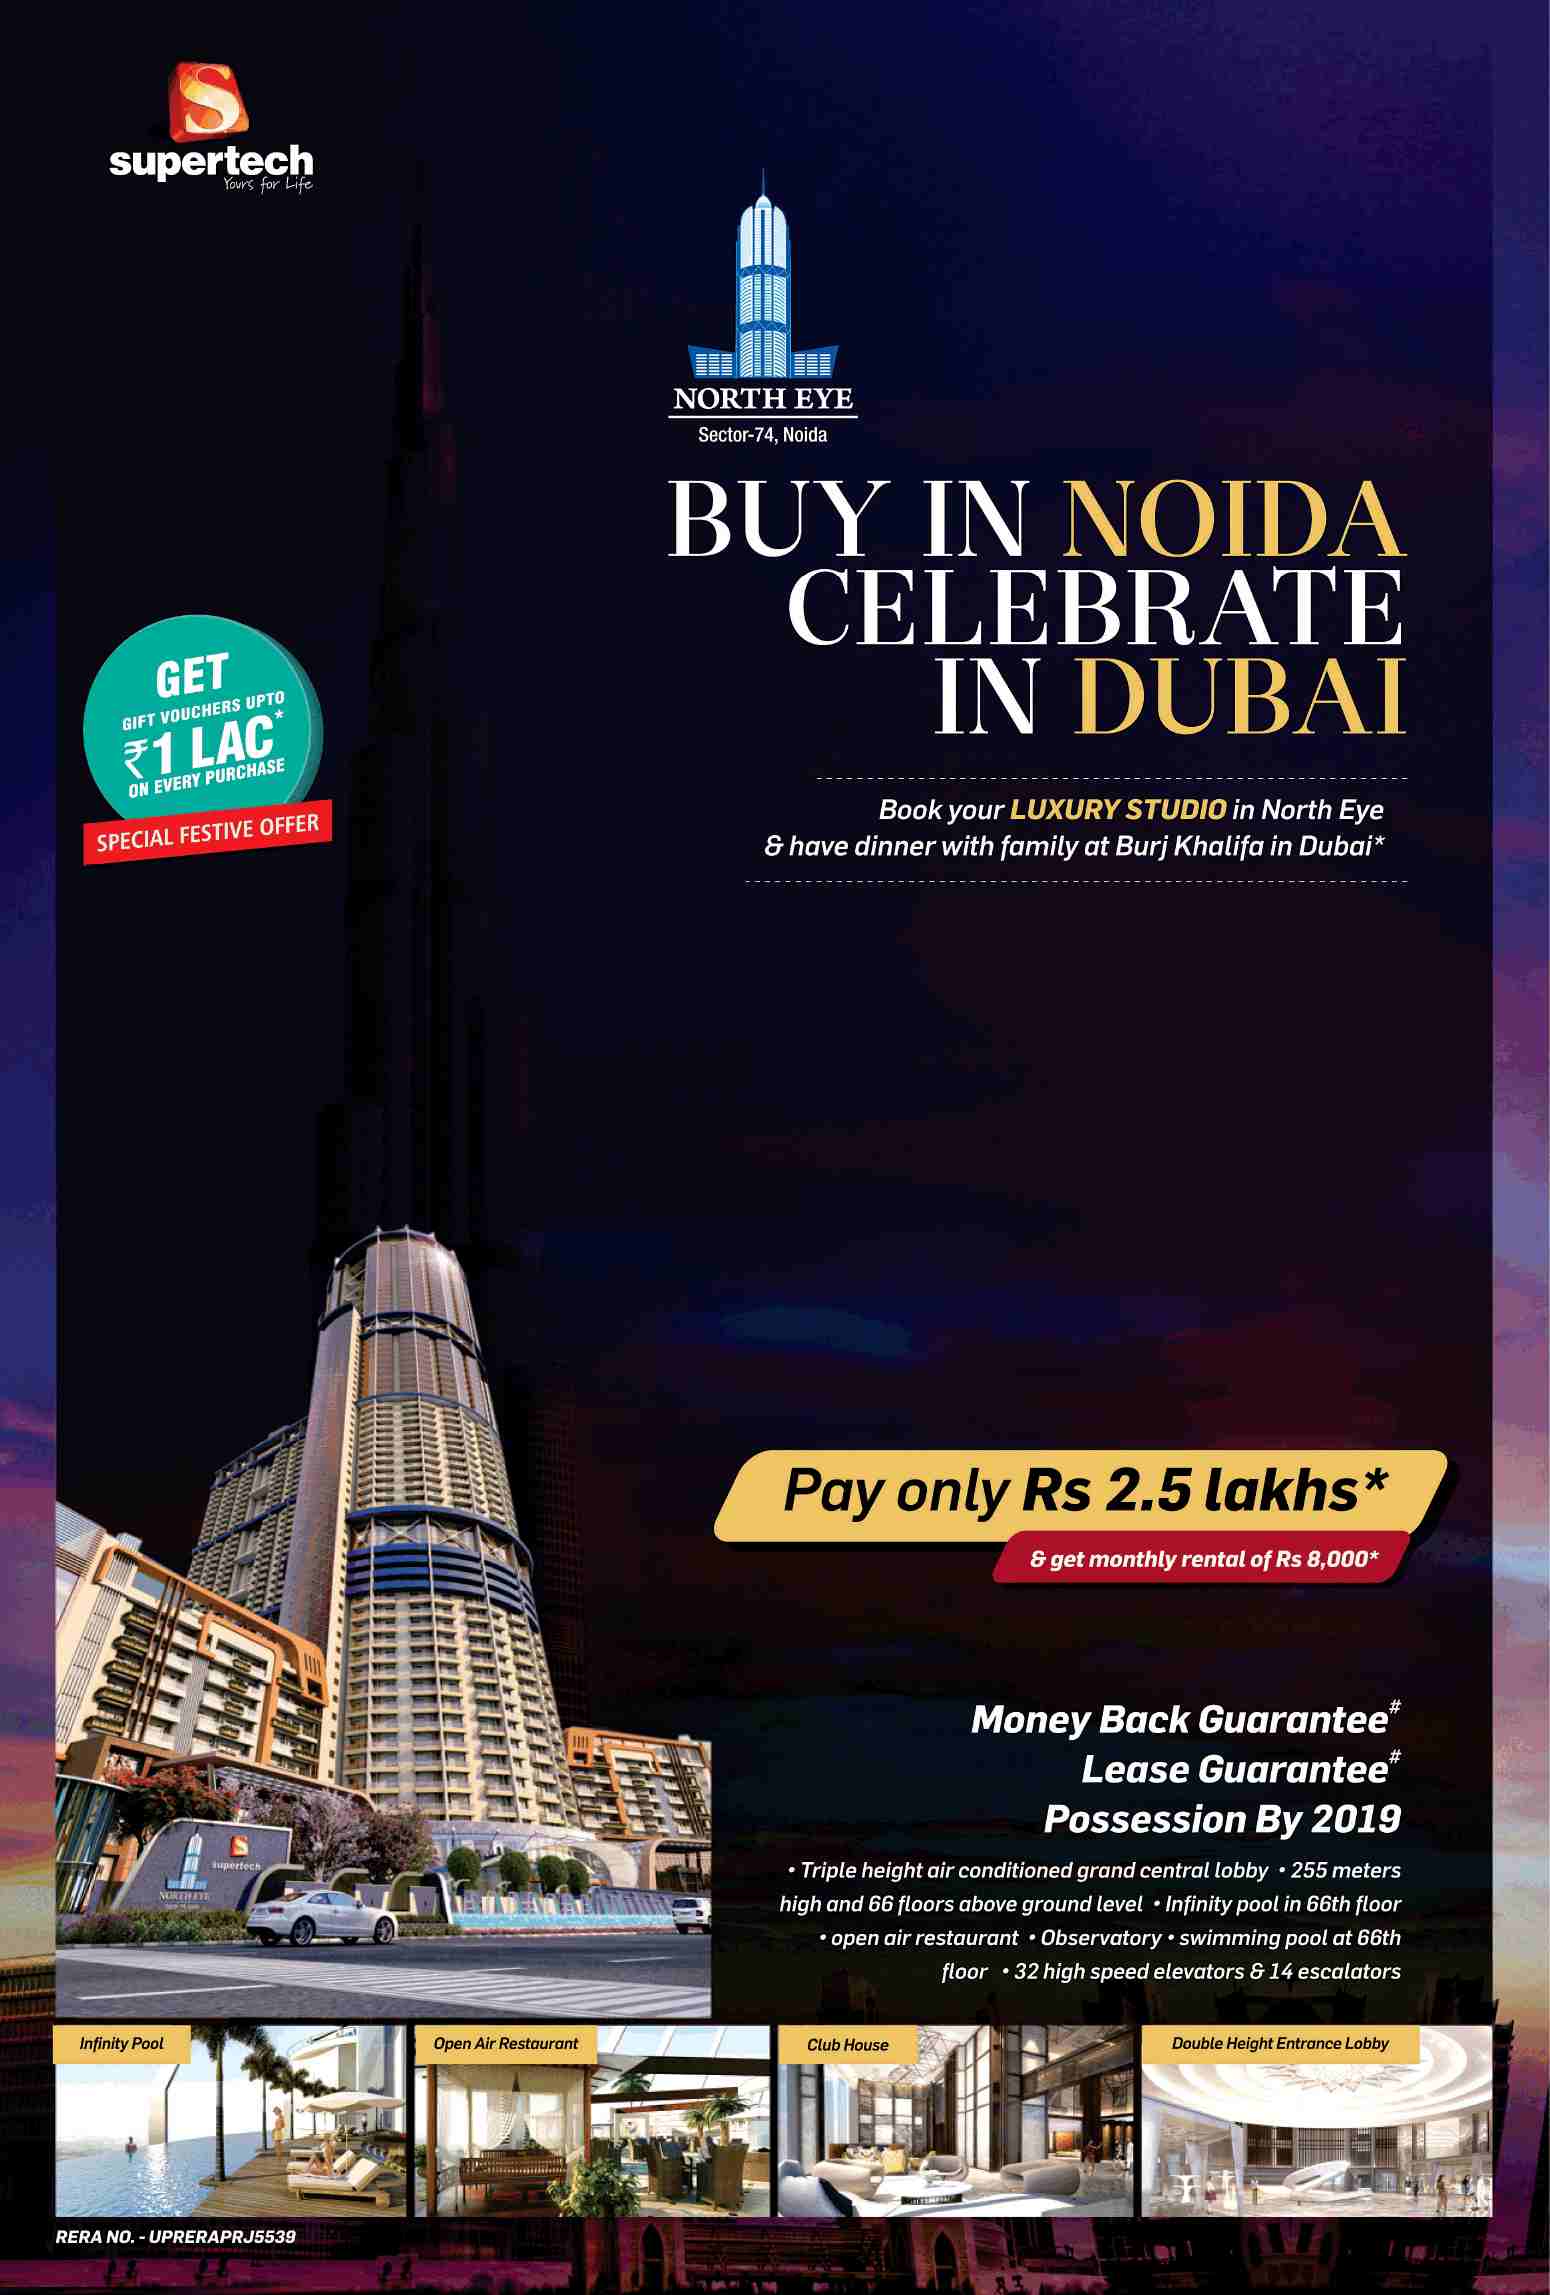 Dine with your family at Burj Khalifa in Dubai by booking luxury studio at Supertech North Eye, Noida Update